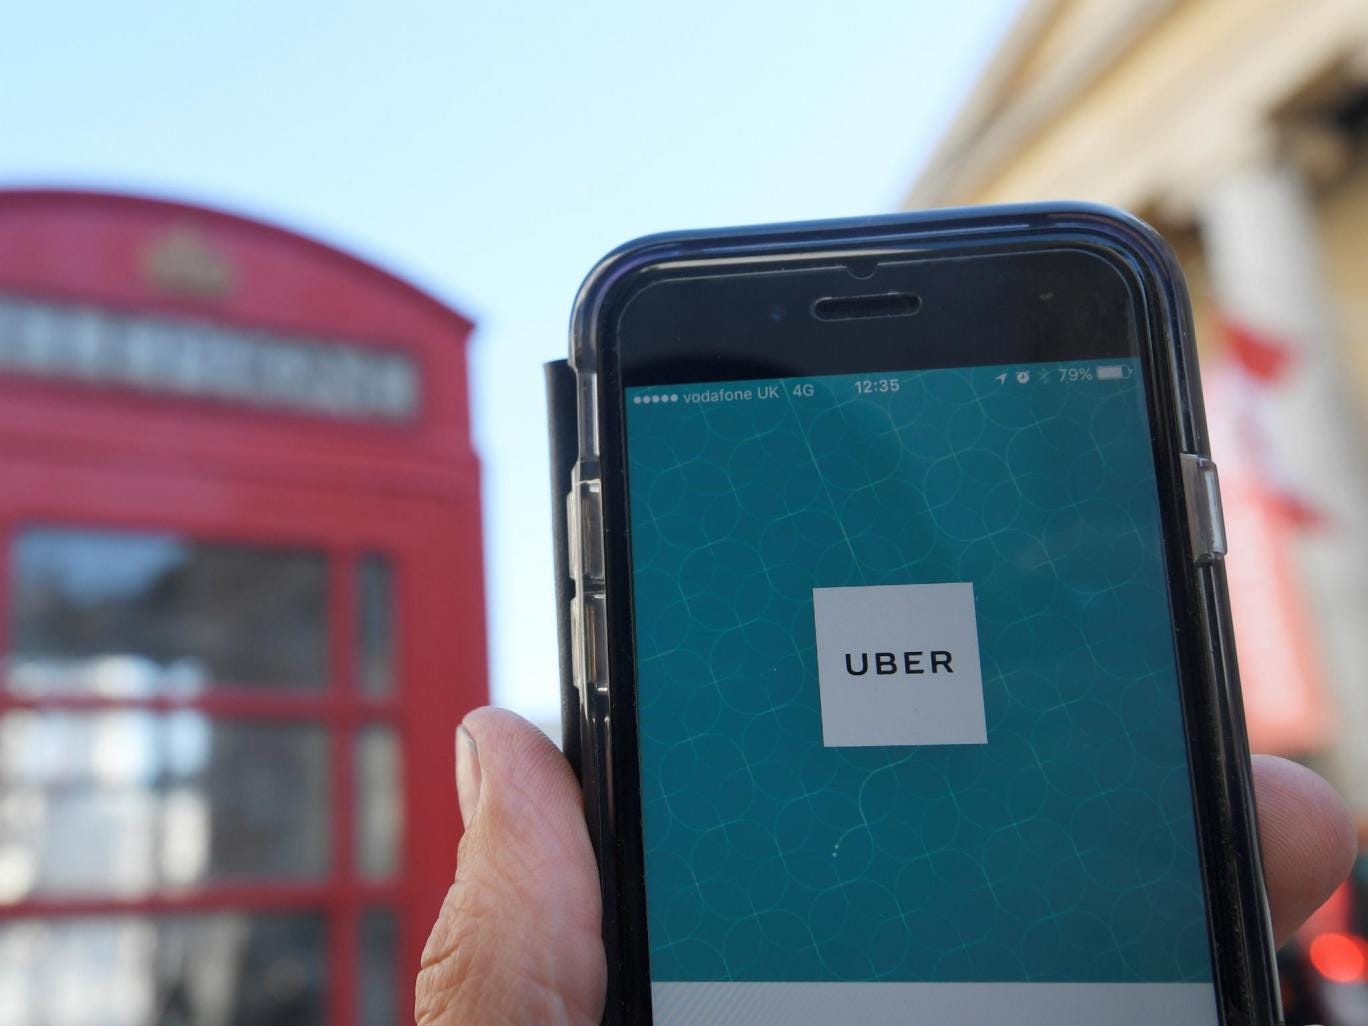 Uber, Uber helps those with mental health issues – what are they left with now?